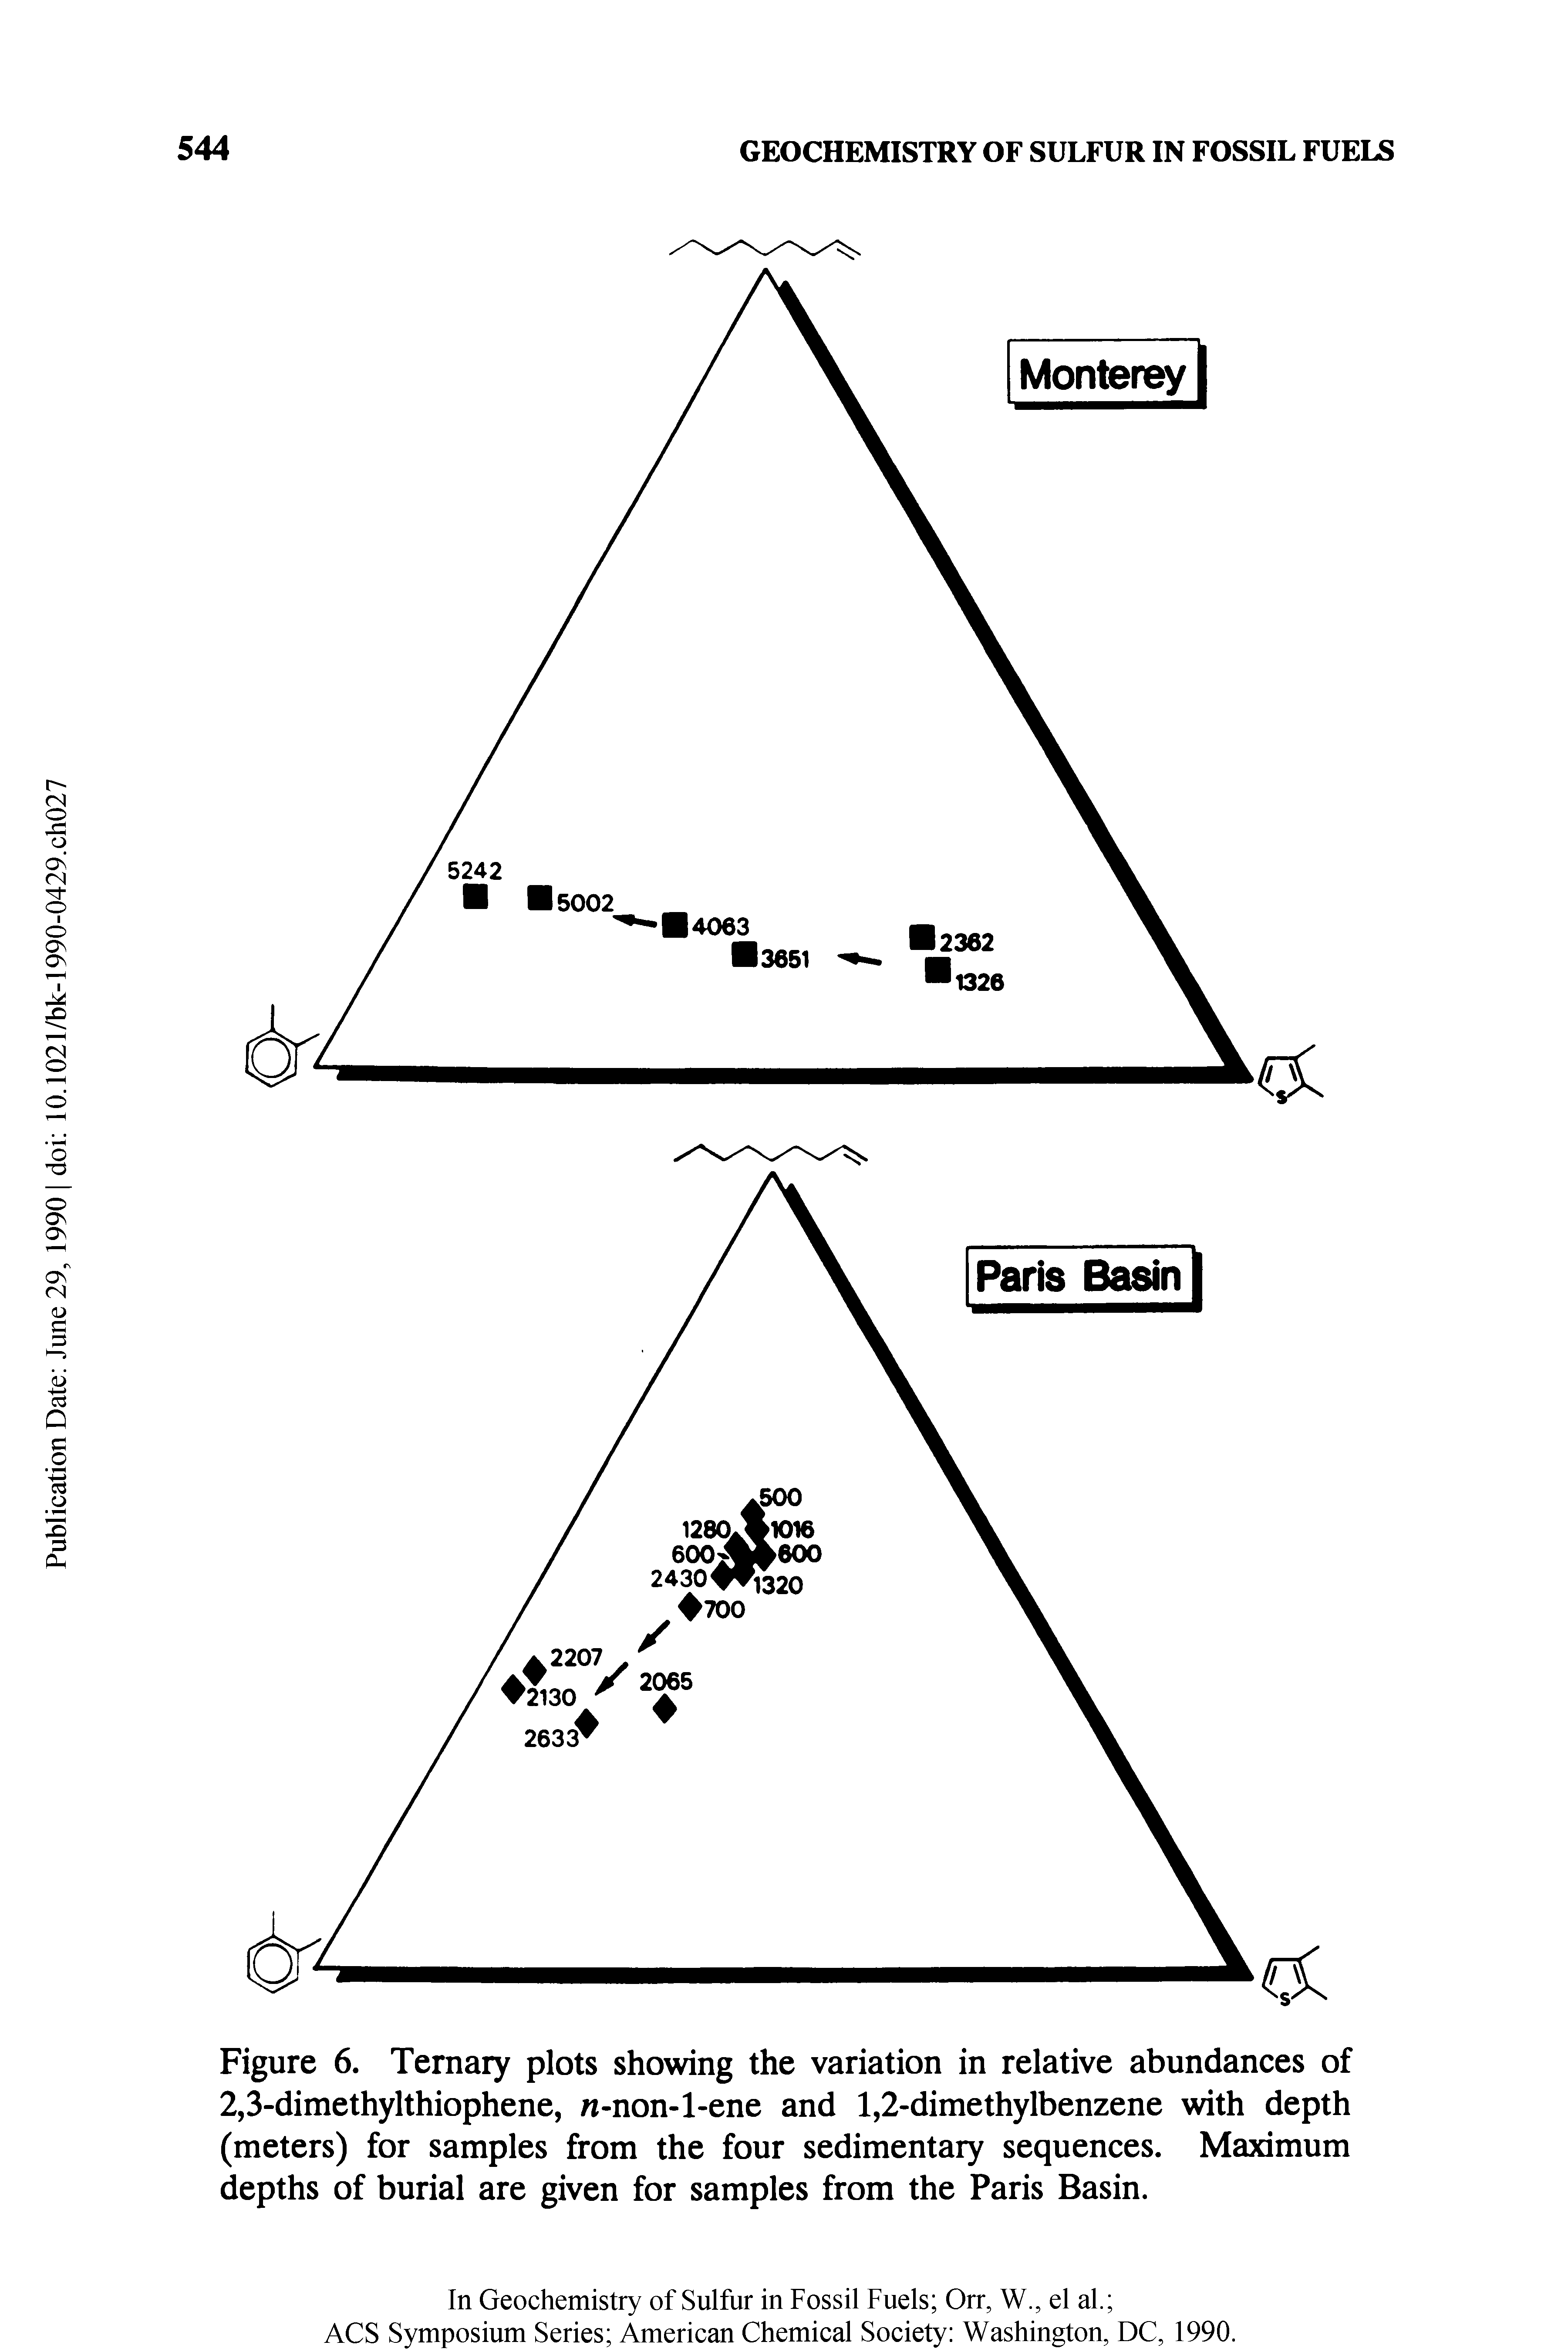 Figure 6. Ternary plots showing the variation in relative abundances of 2,3-dimethylthiophene, n-non-l-ene and 1,2-dimethylbenzene with depth (meters) for samples from the four sedimentary sequences. Maximum depths of burial are given for samples from the Paris Basin.